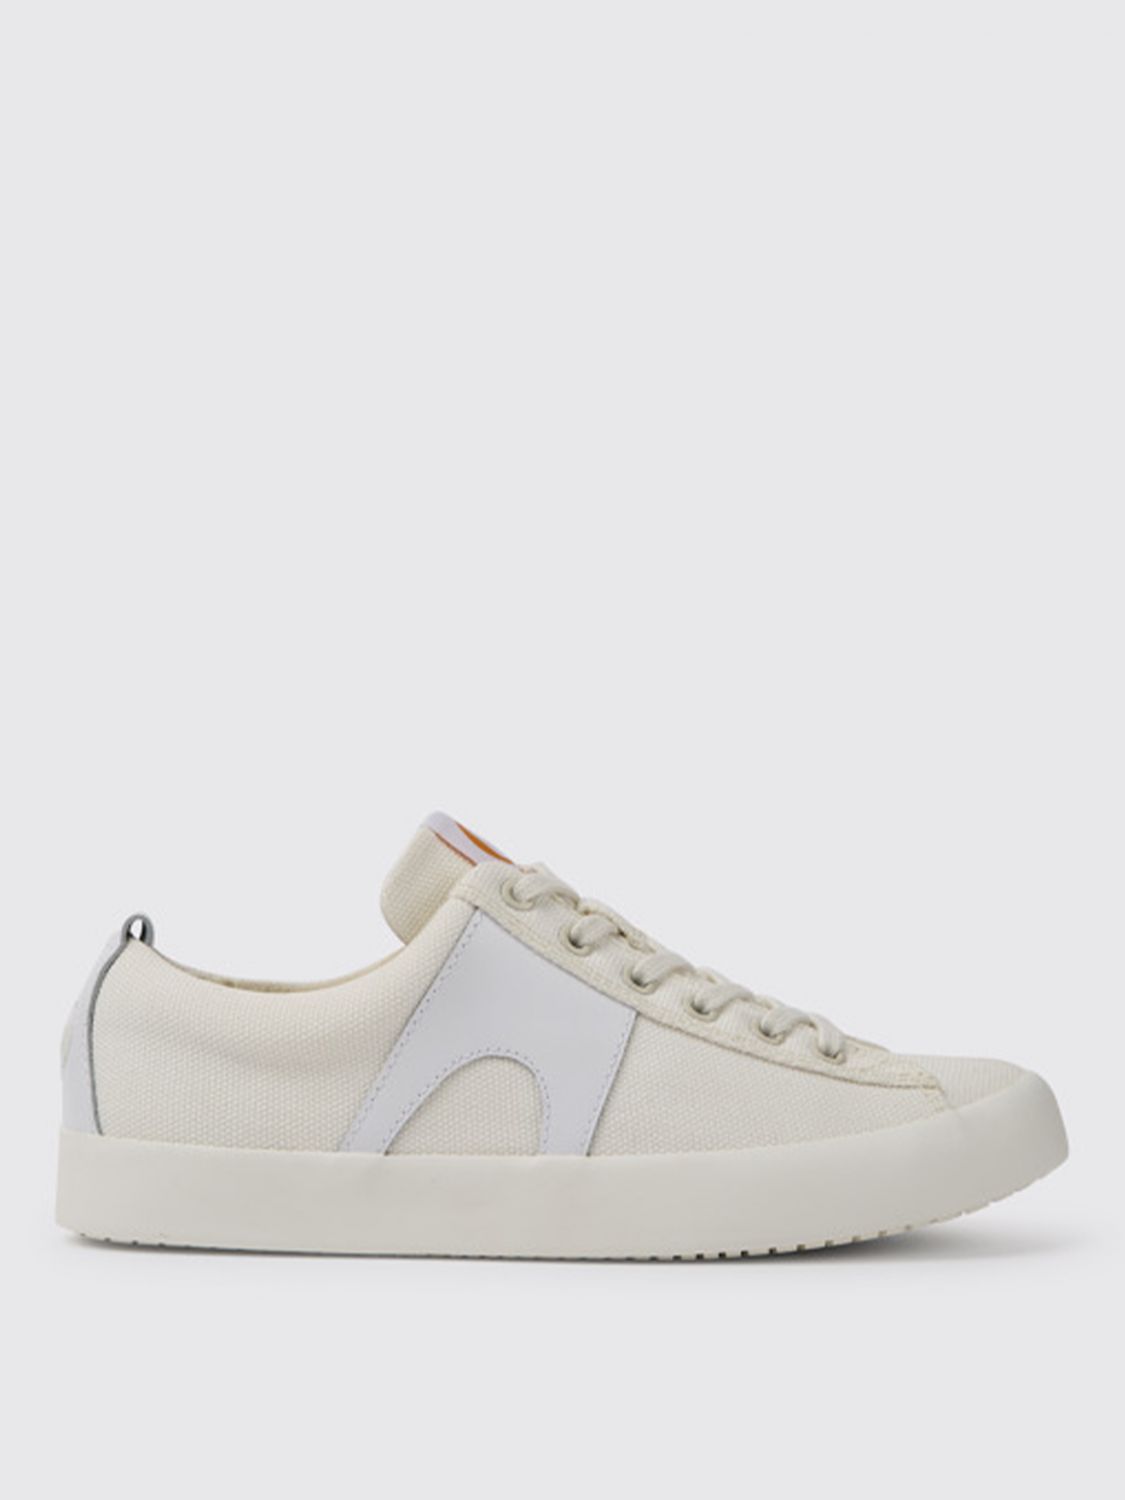 Camper Imar Camper sneakers in calfskin and recycled cotton